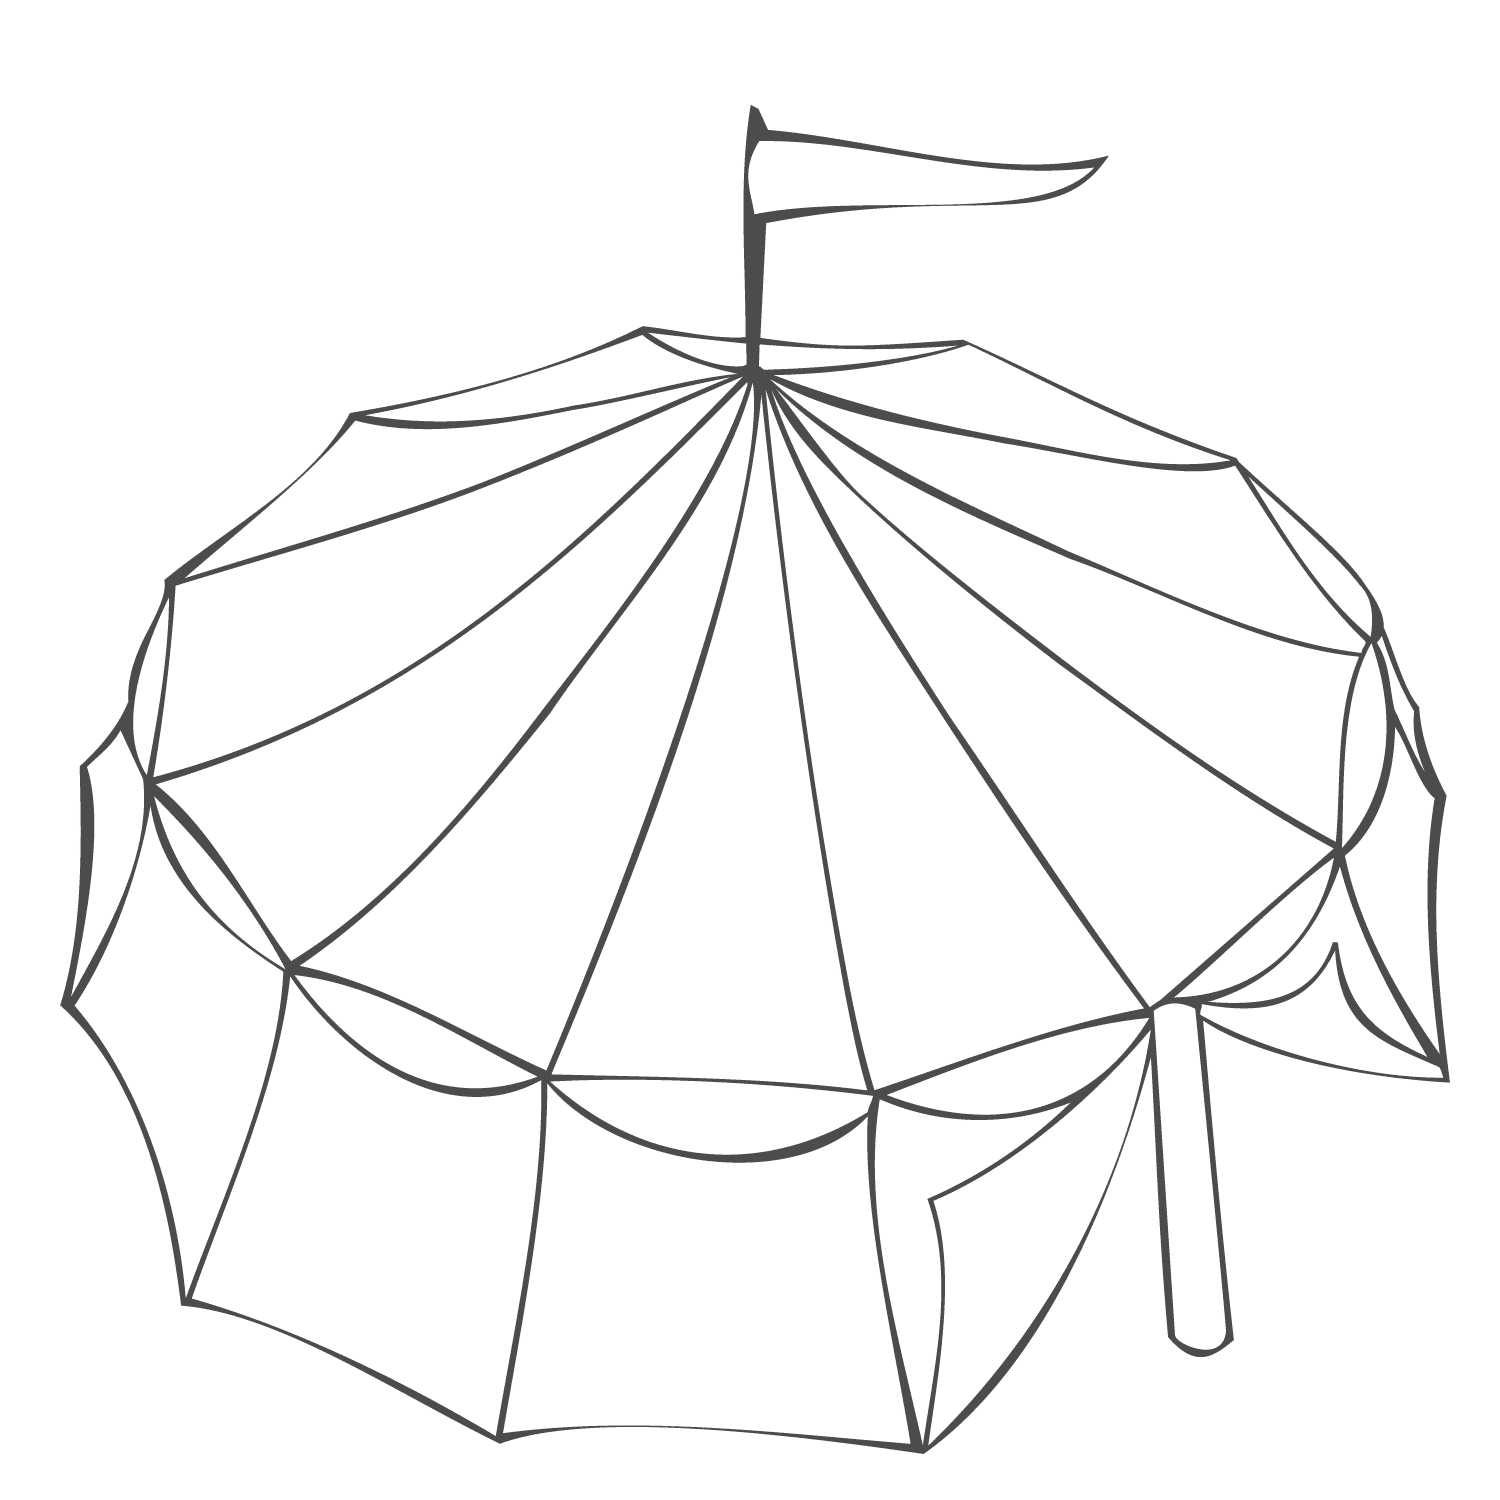 Circus Tent Coloring Page